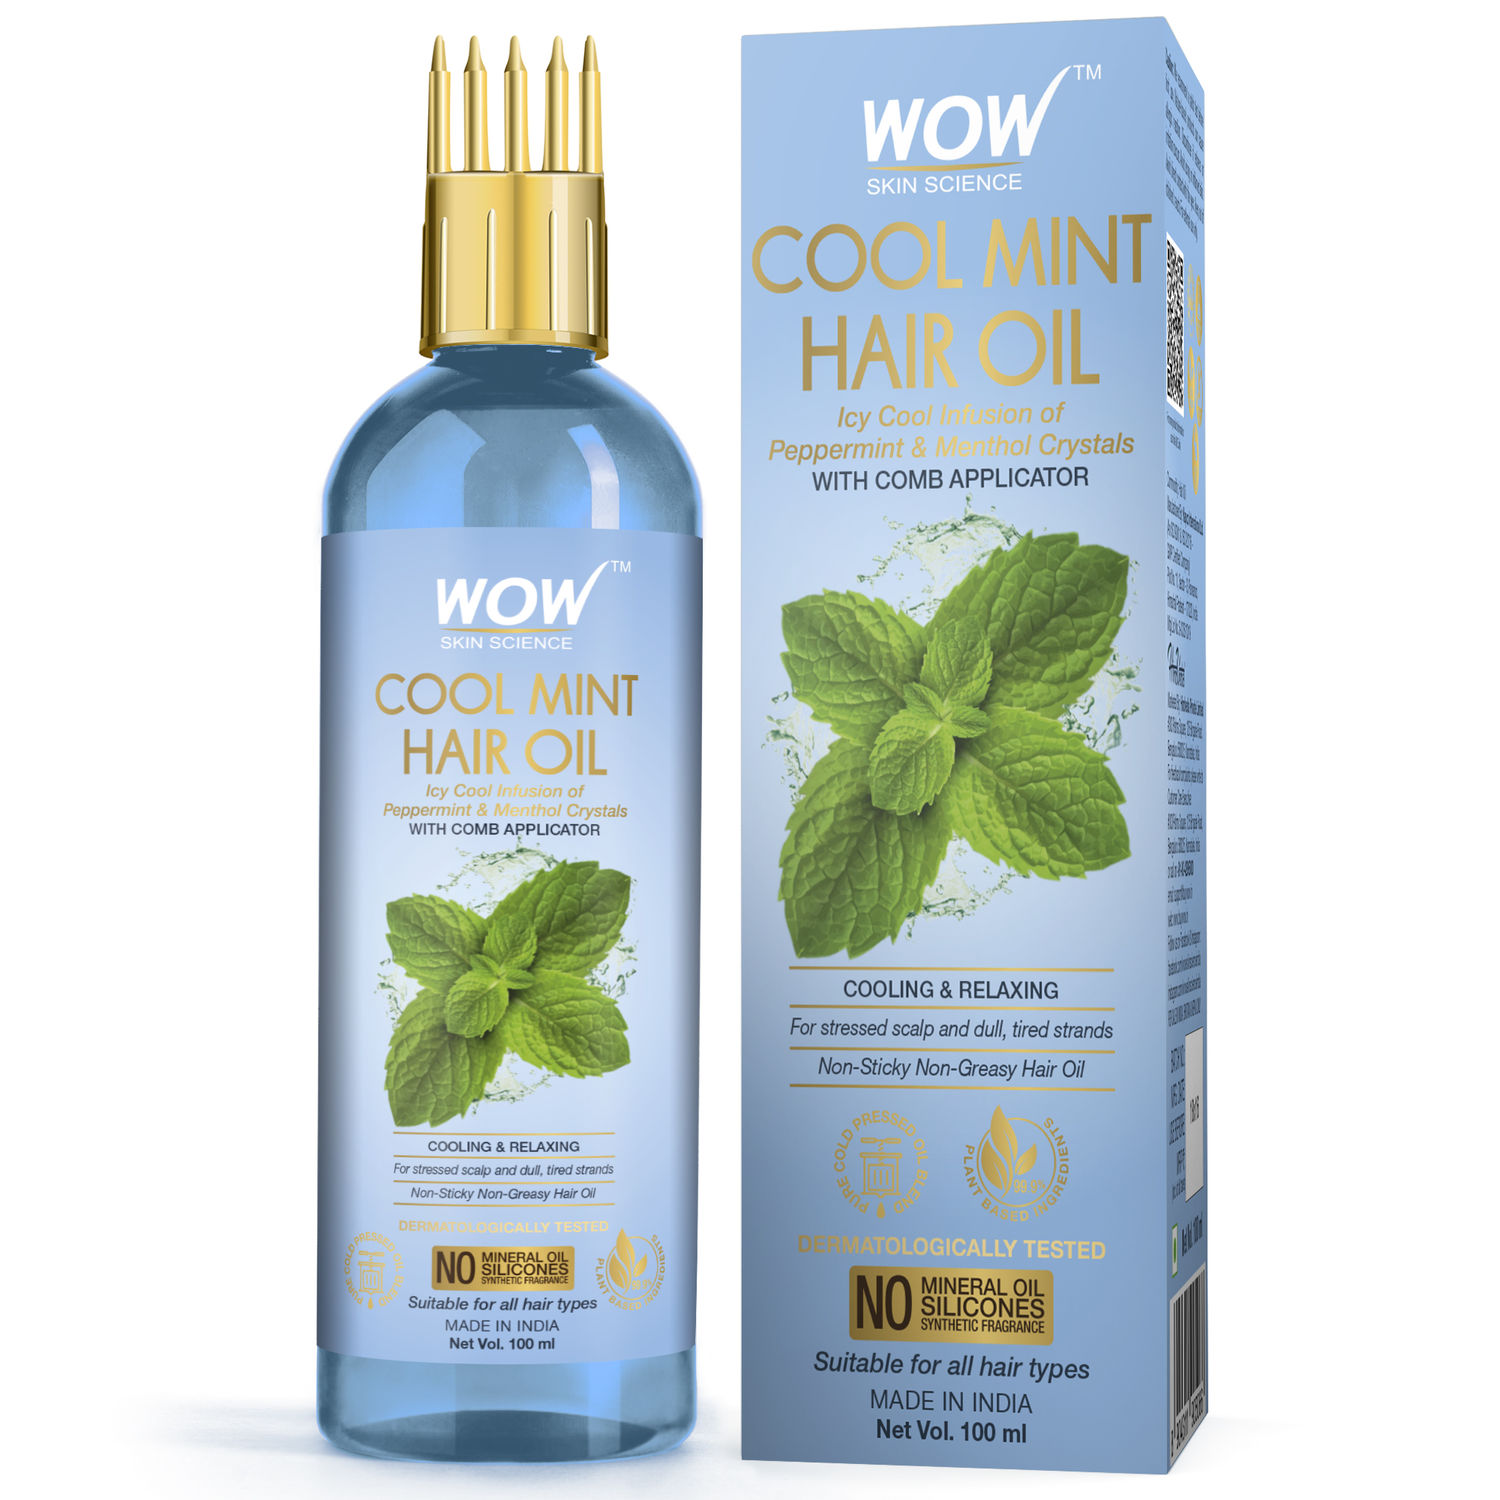 Buy WOW Skin Science Cool Mint Hair Oil - with Comb Applicator - 100mL - Purplle